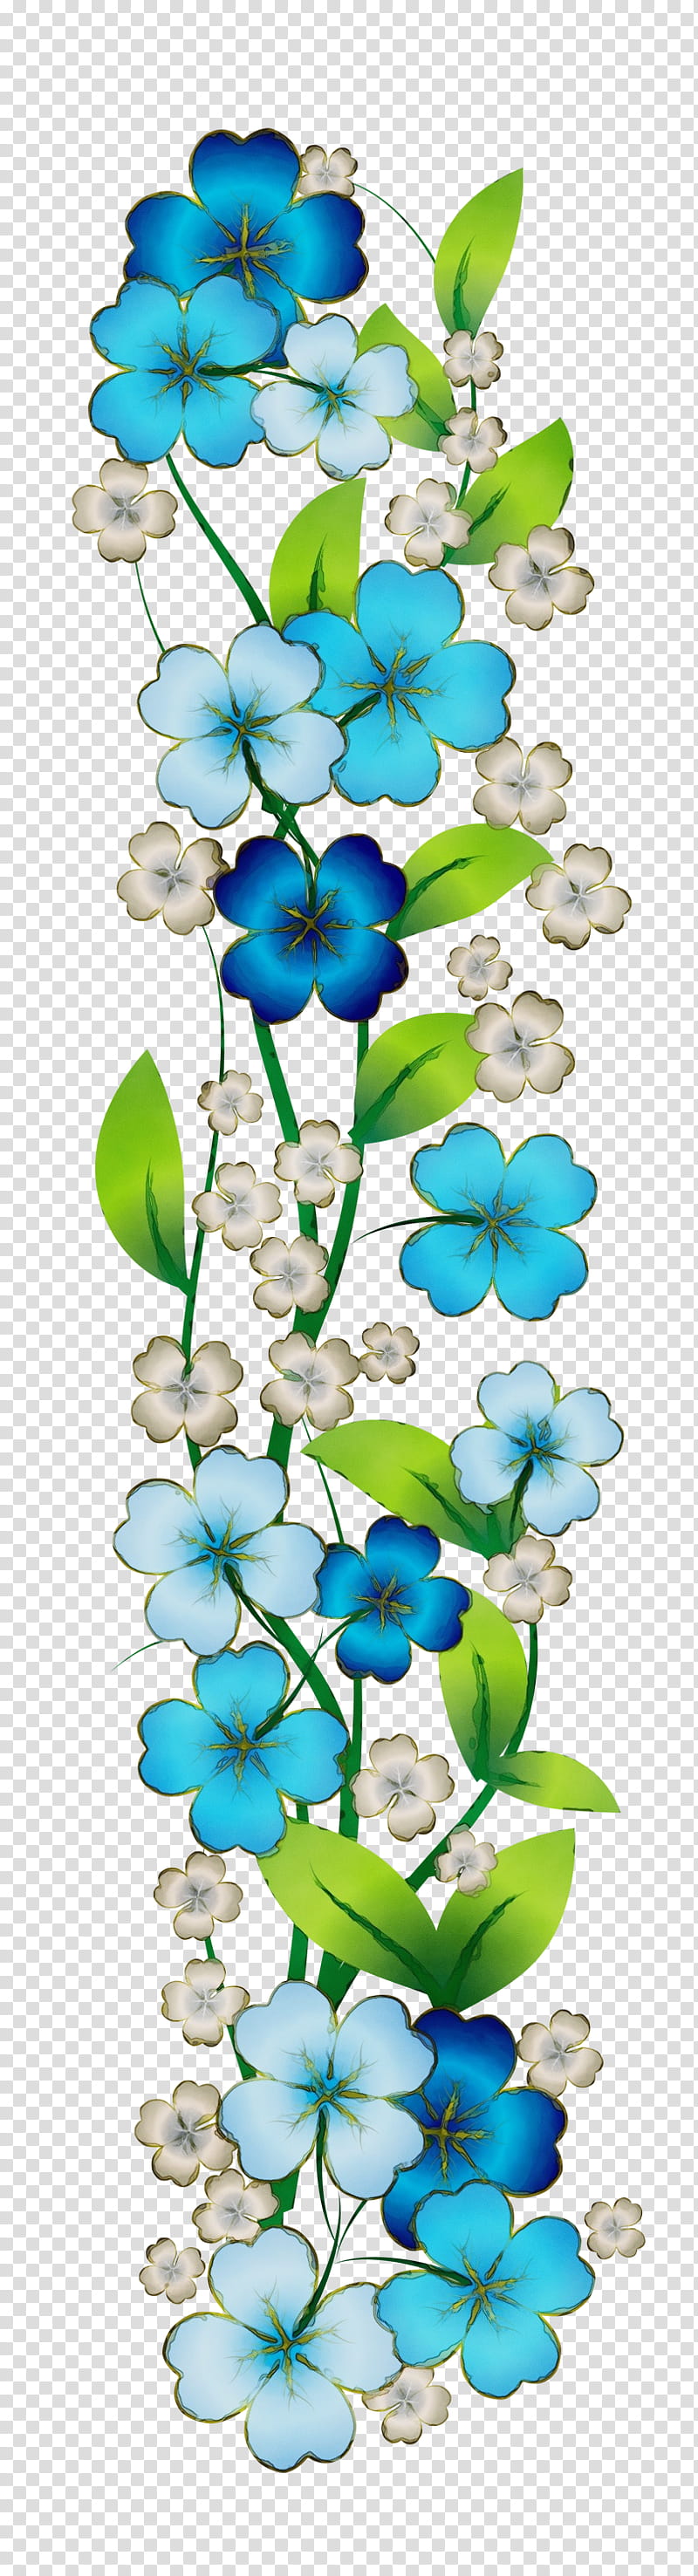 Blue Flower Borders And Frames, Blue Rose, Floral Design, Yellow, Royal Blue, Plant, Petal, Wildflower transparent background PNG clipart